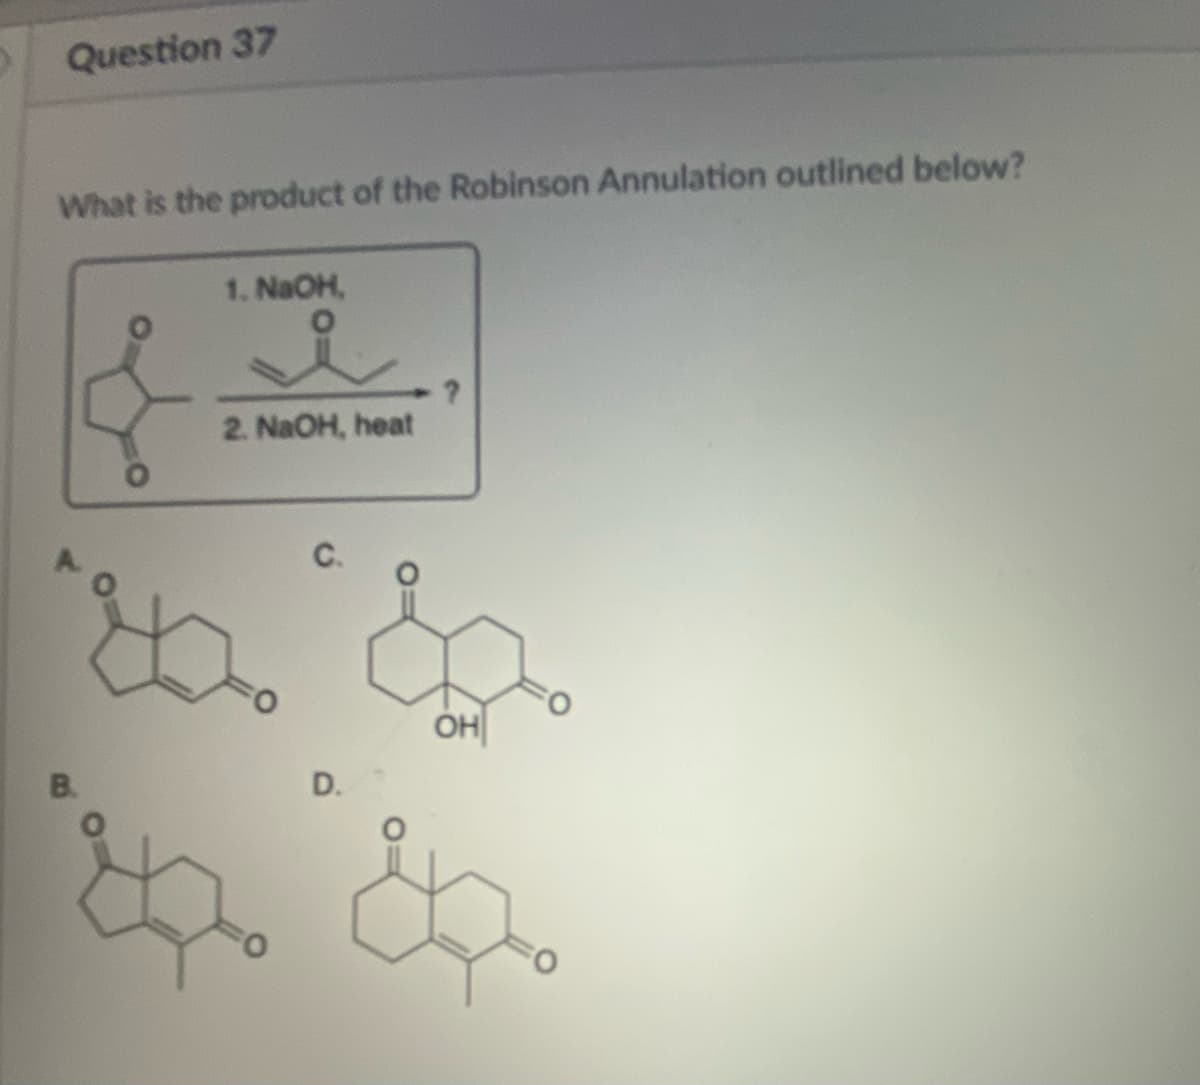 Question 37
What is the product of the Robinson Annulation outlined below?
B.
1. NaOH,
2. NaOH, heat
D.
OH